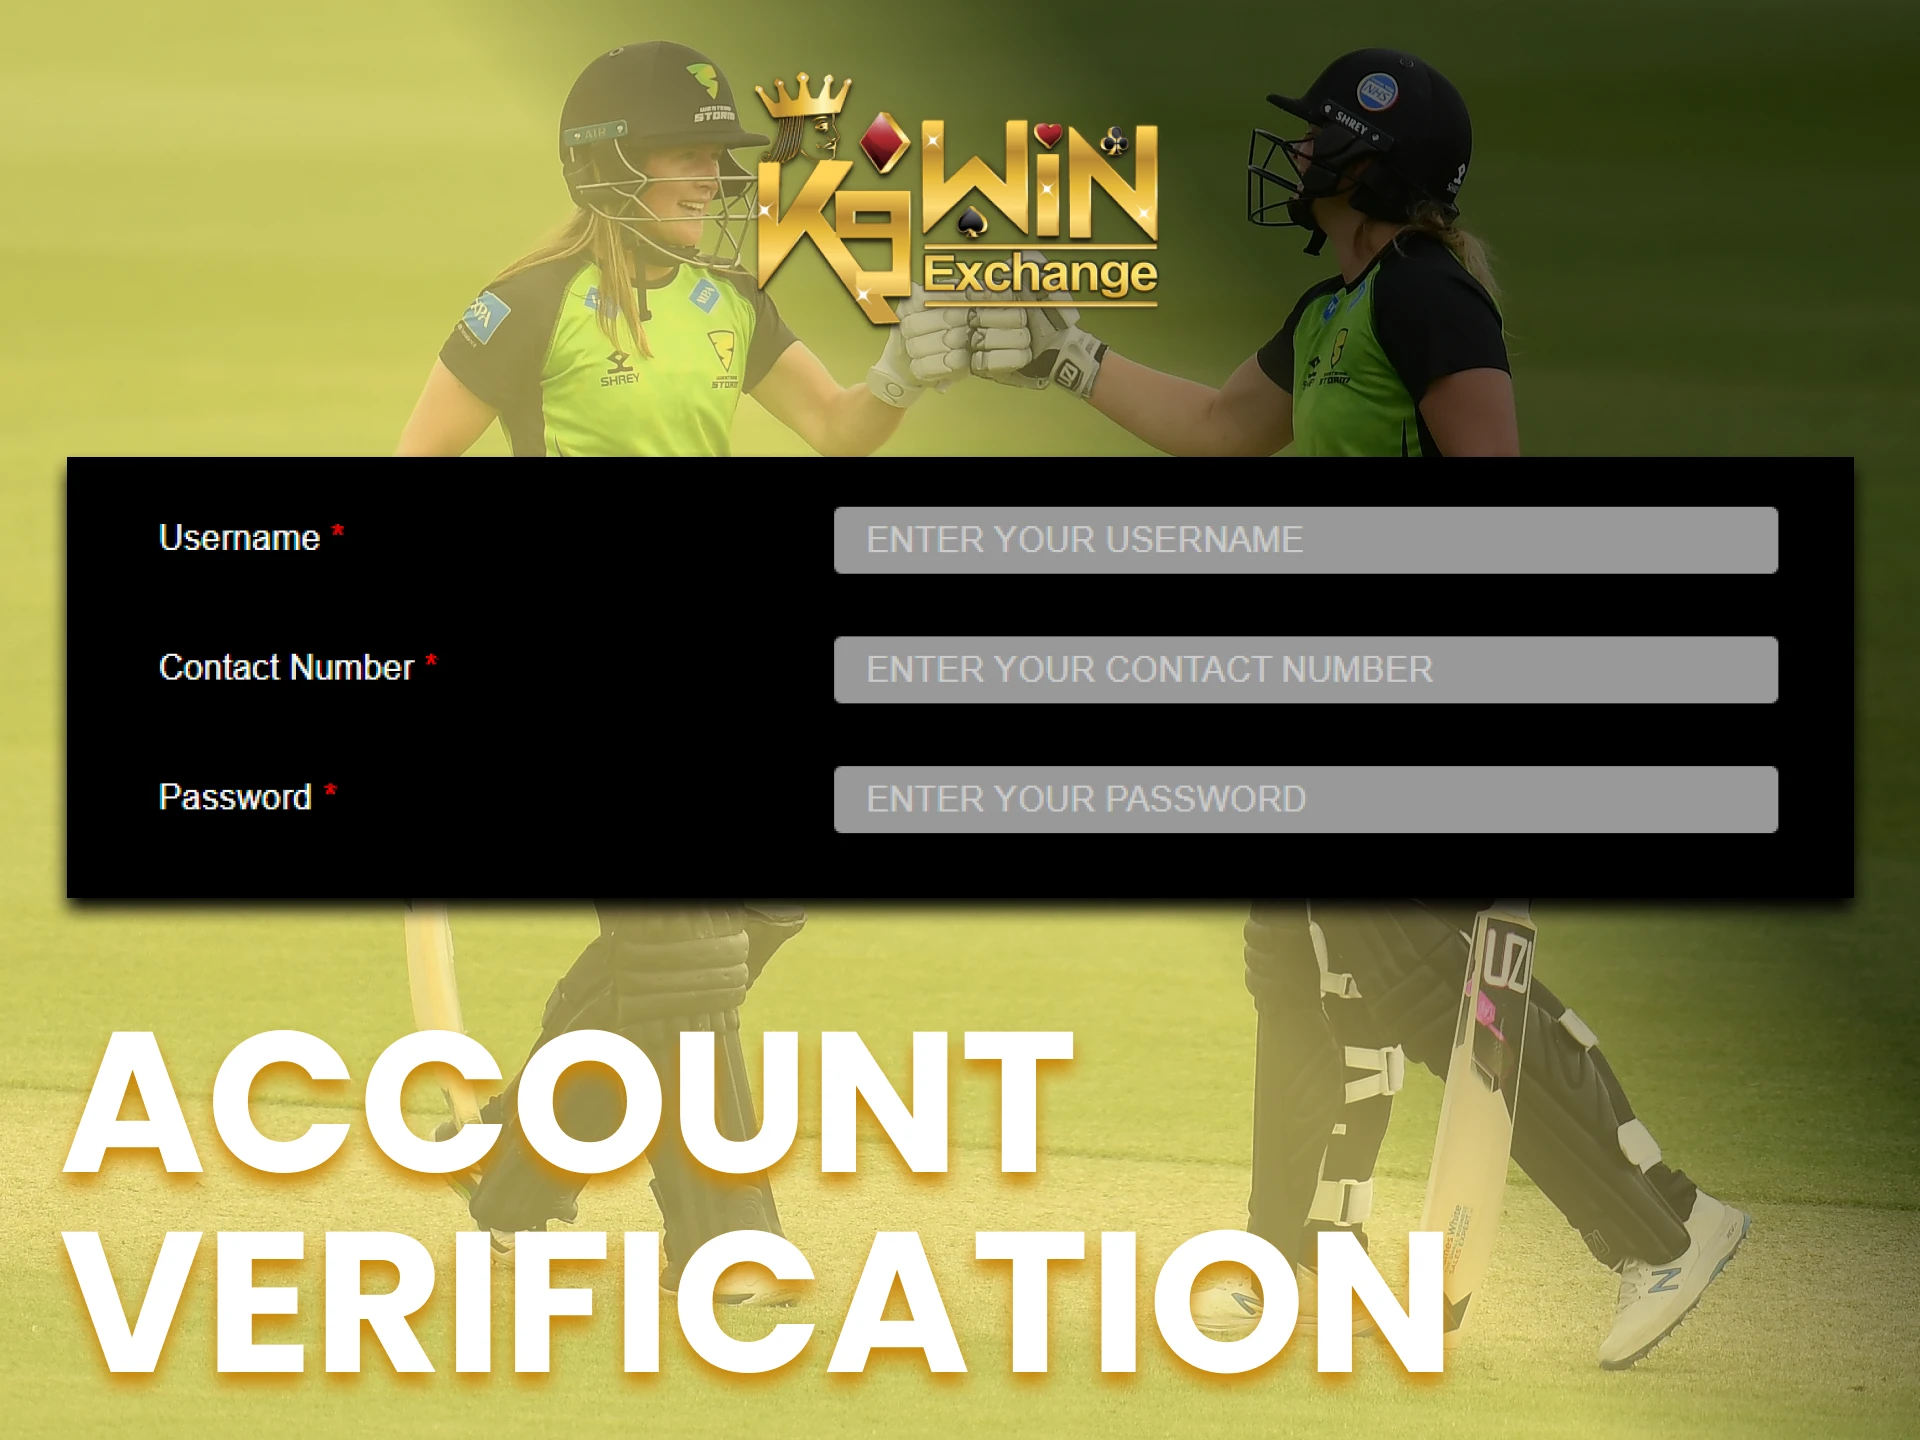 Verify your K9Win account by providing the required data.